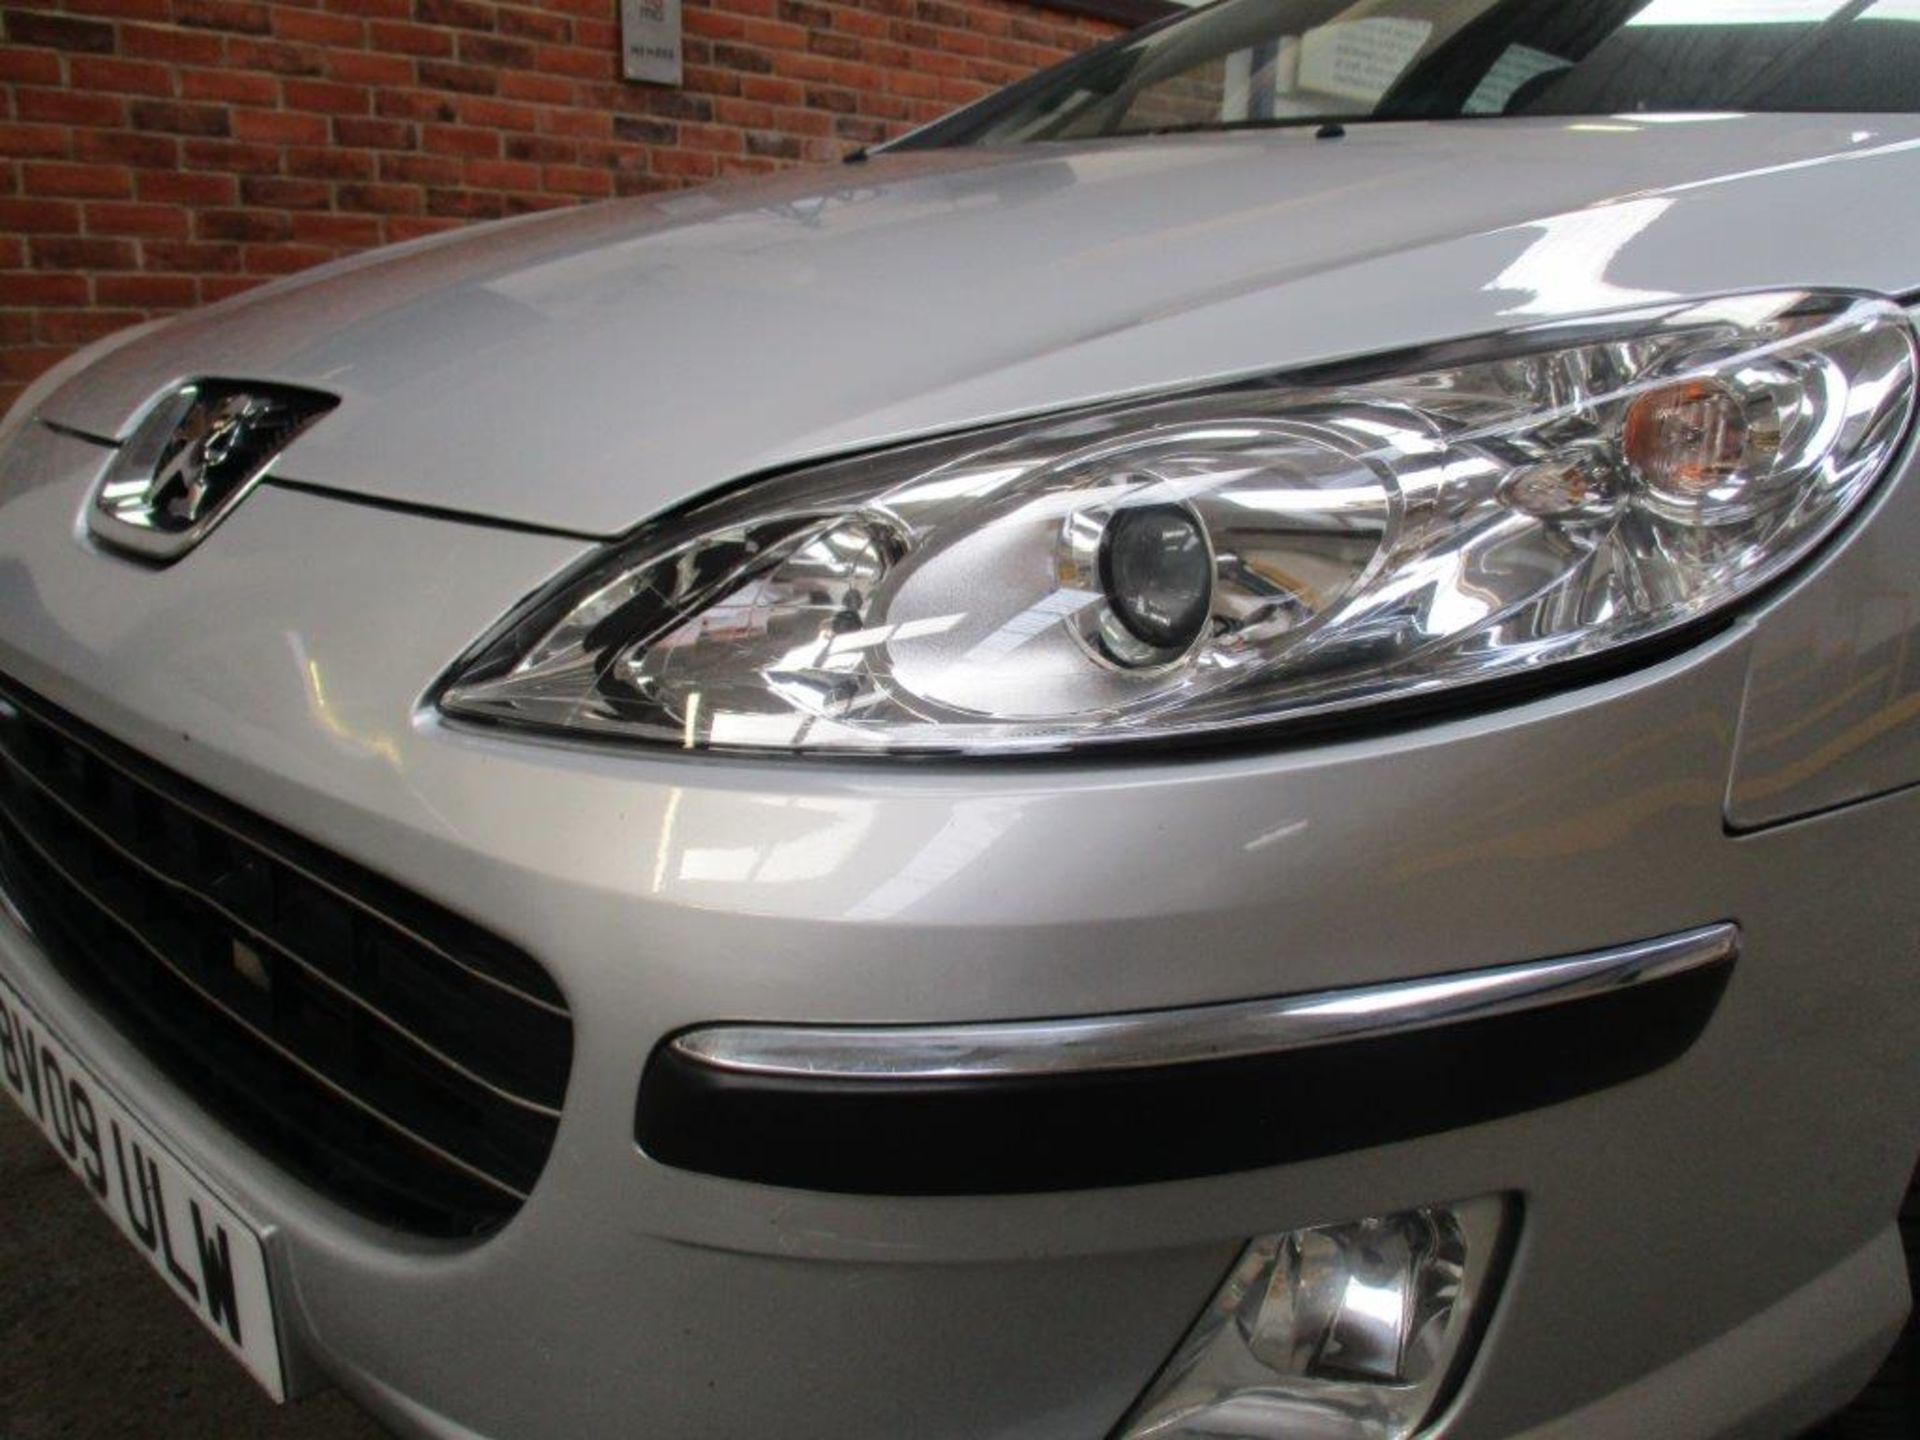 09 09 Peugeot 407 SW - Image 10 of 22